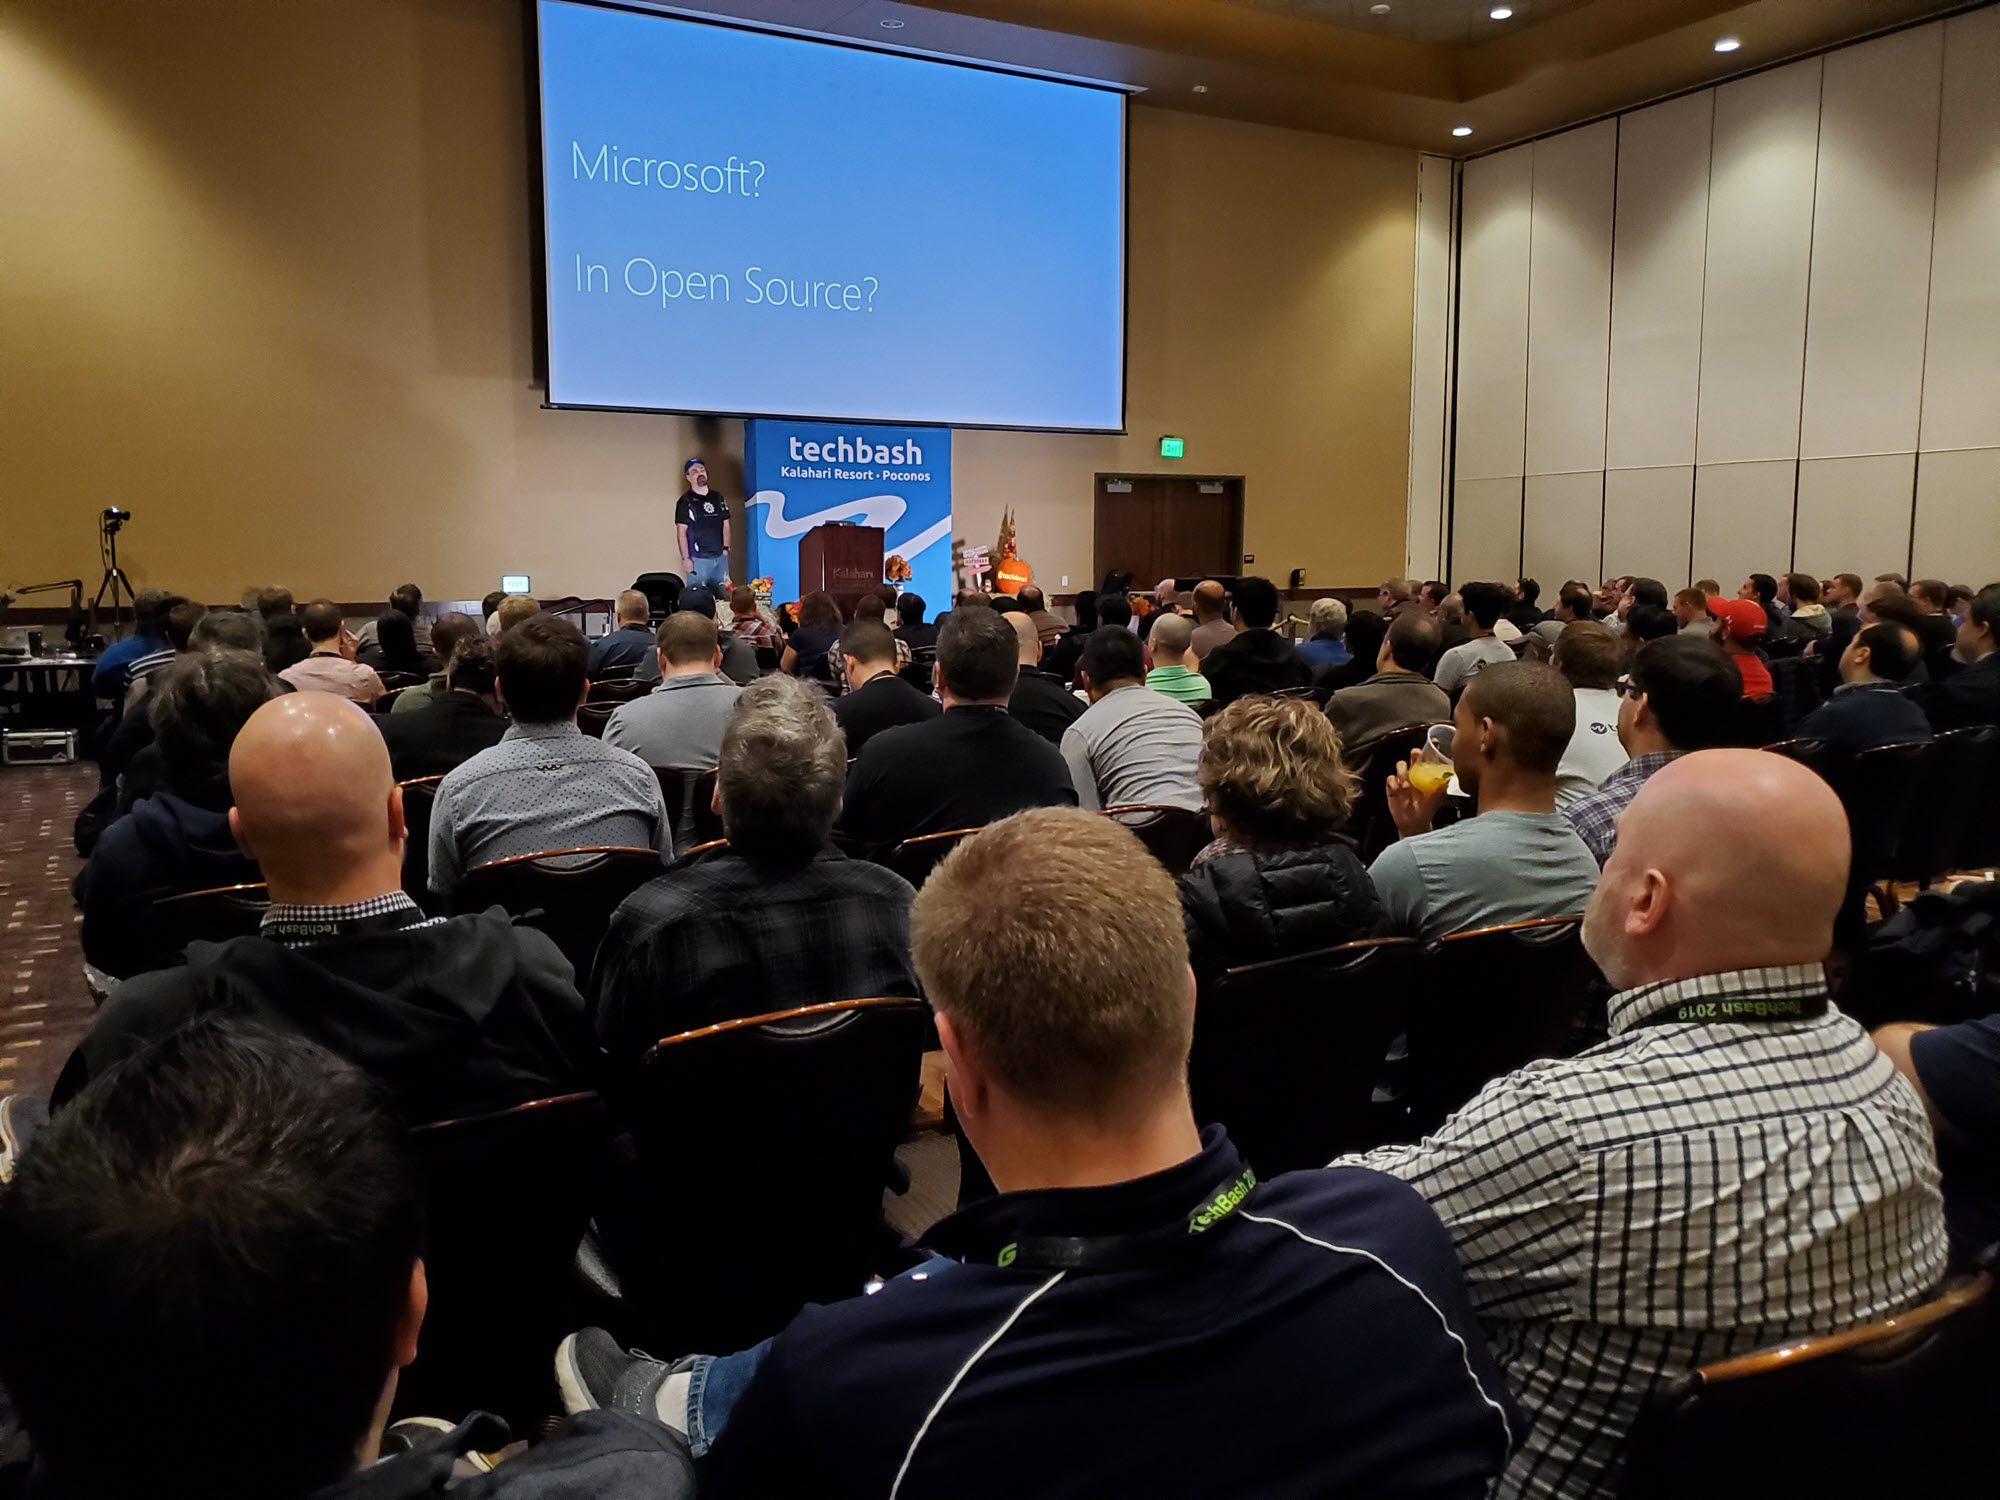 An image from TechBash 2019